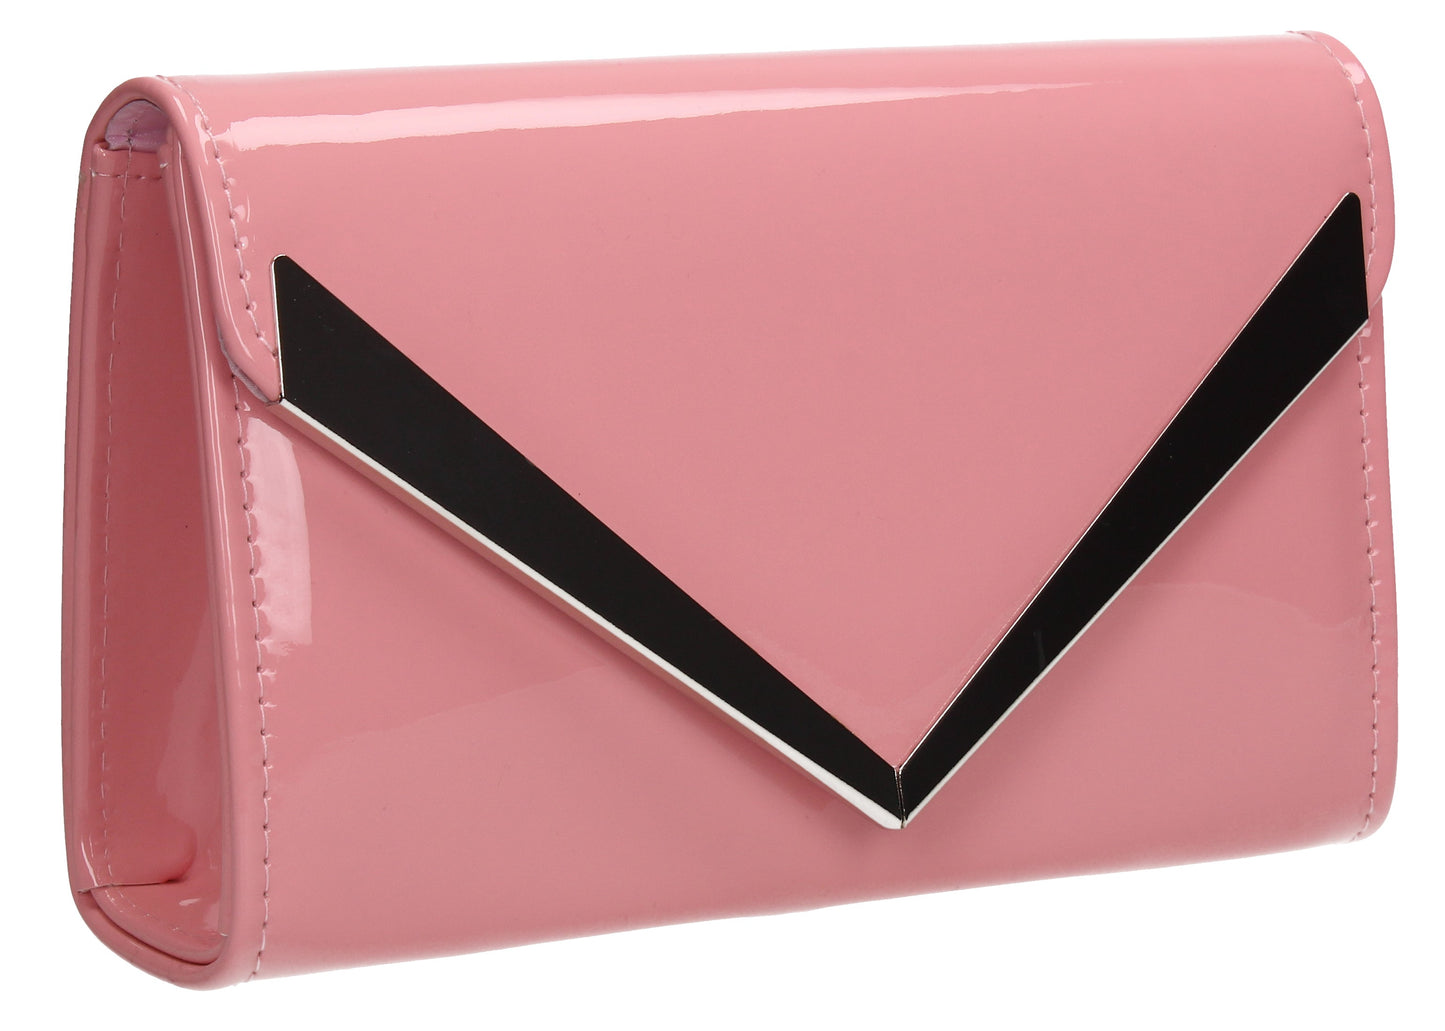 SWANKYSWANS Wendy V Patent Clutch Bag Pink Cute Cheap Clutch Bag For Weddings School and Work